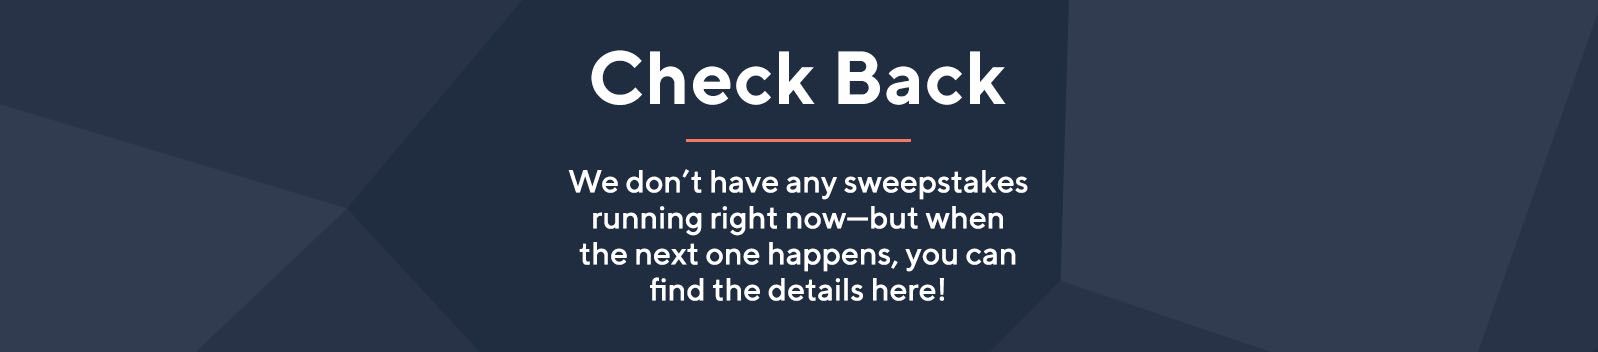 Check Back. We don't have any sweepstakes running right now—but when the next one happens, you can find the details here!